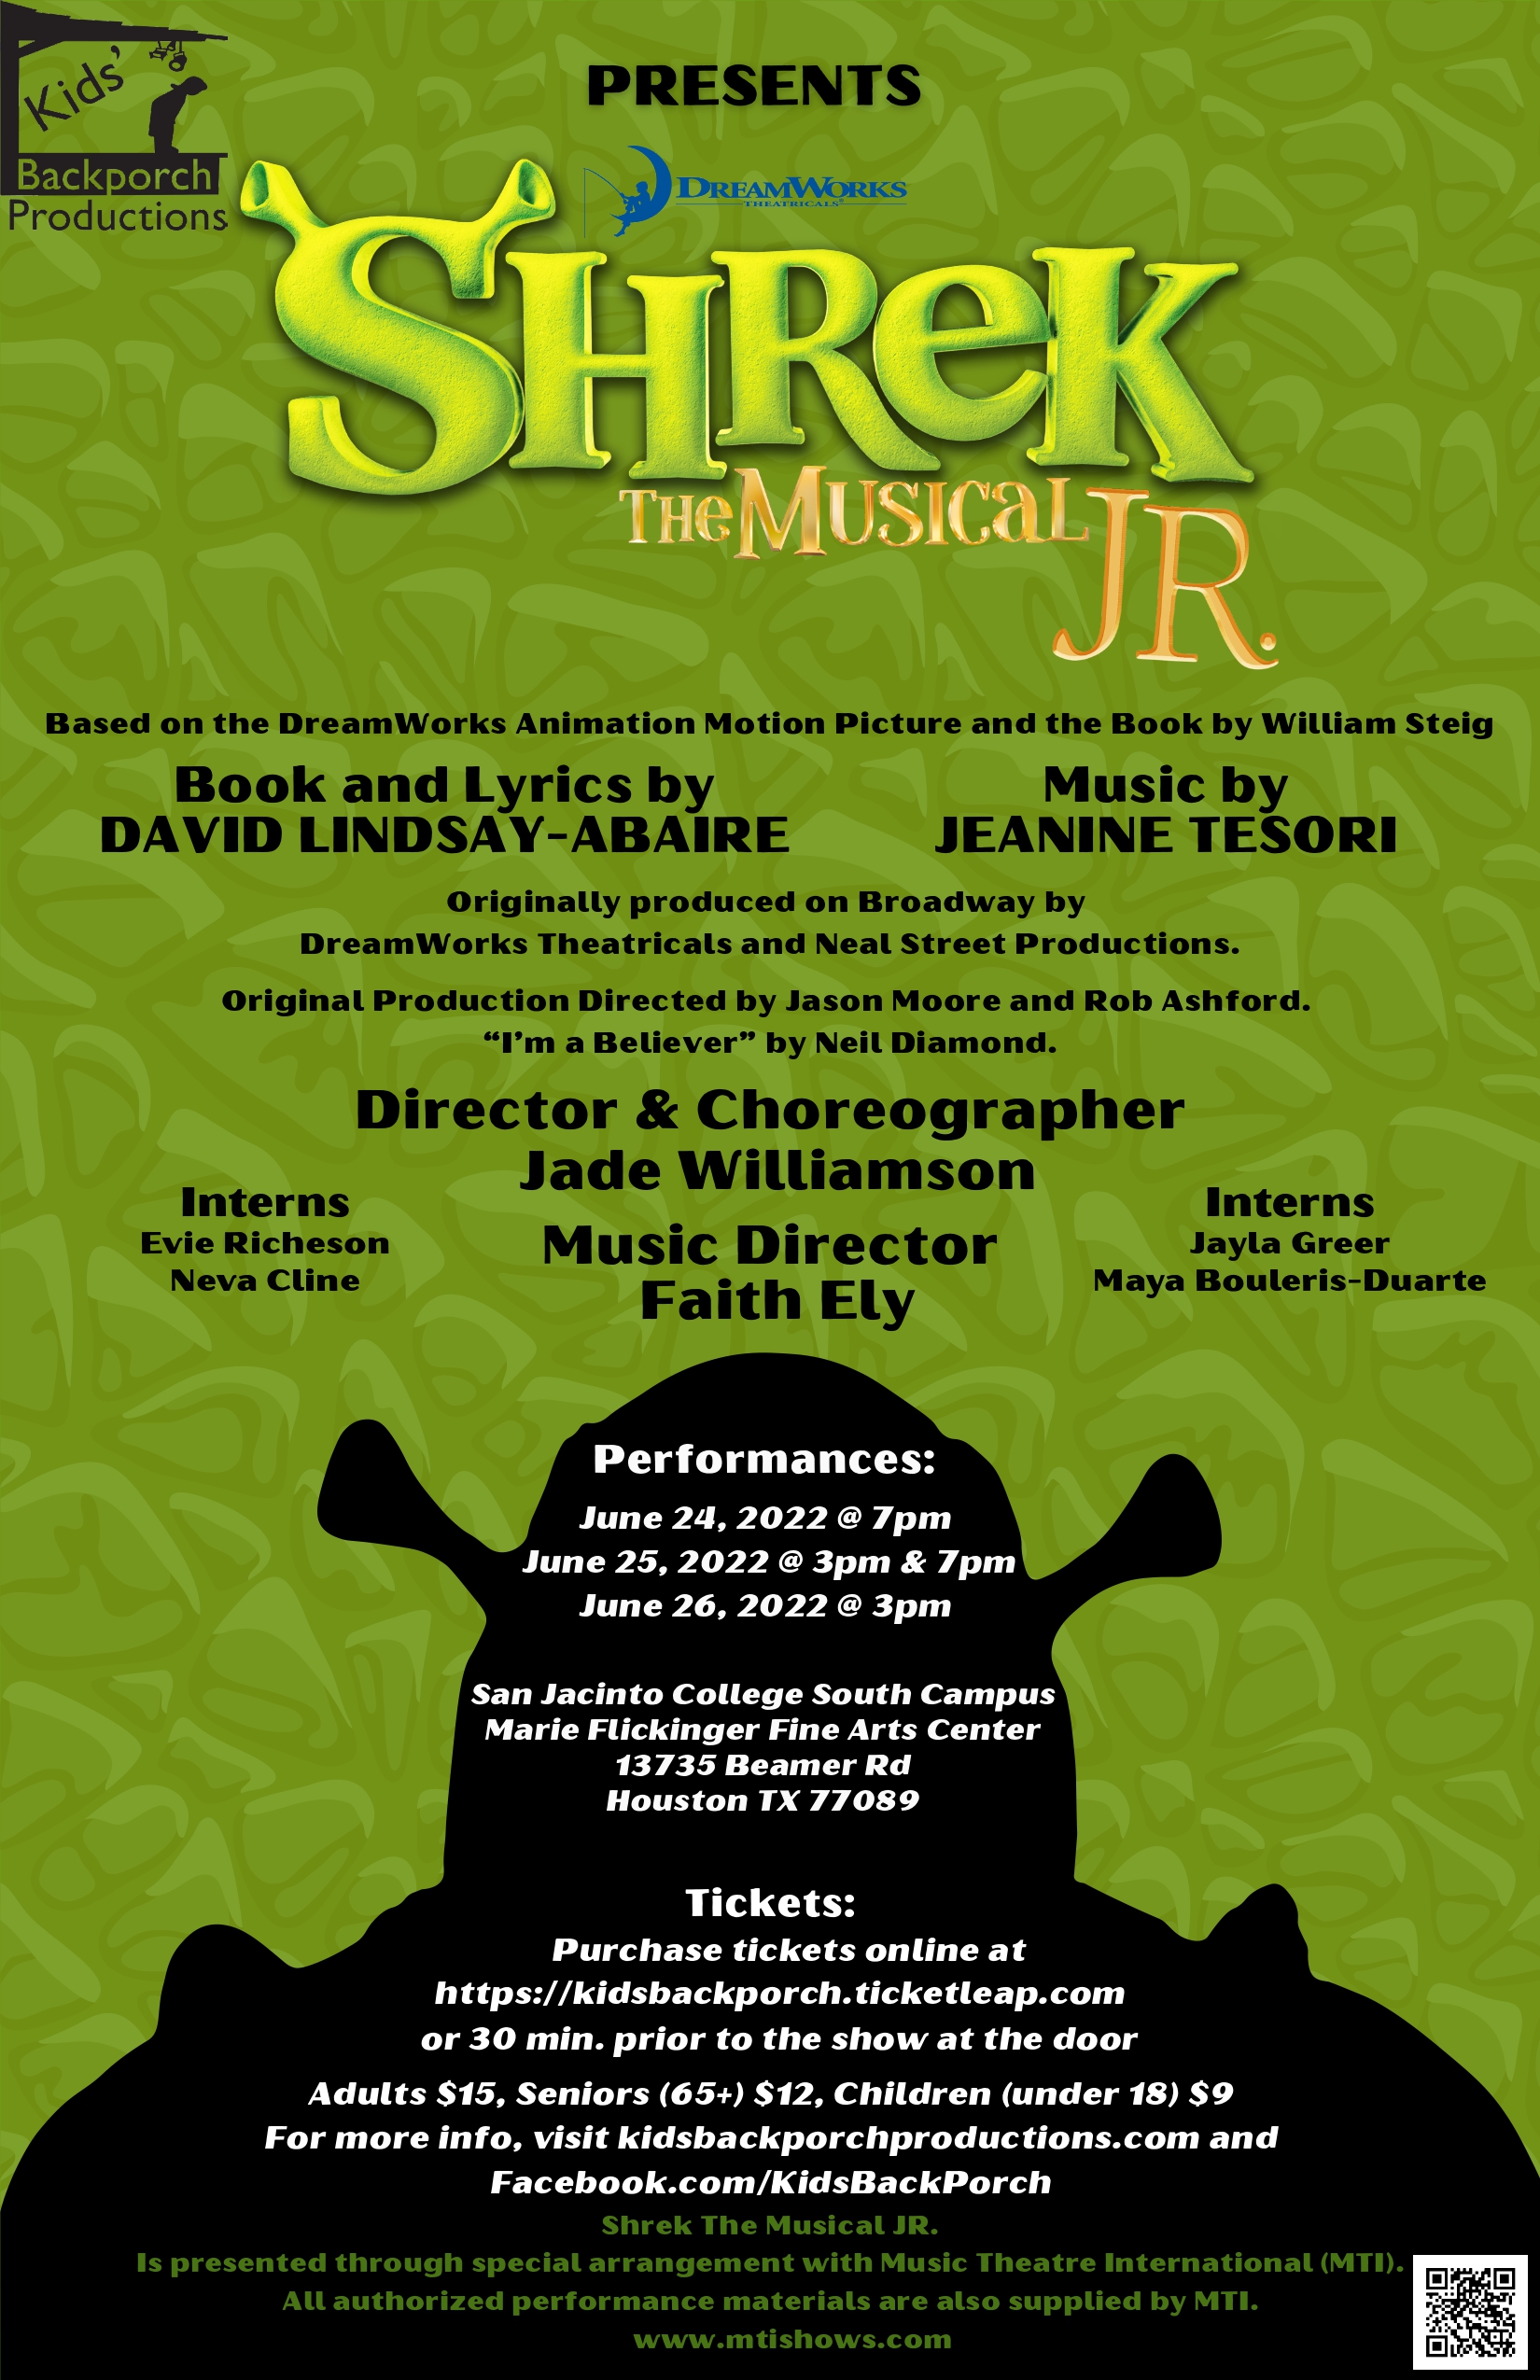 Kids’ Backporch Productions presents Shrek, Jr the musical